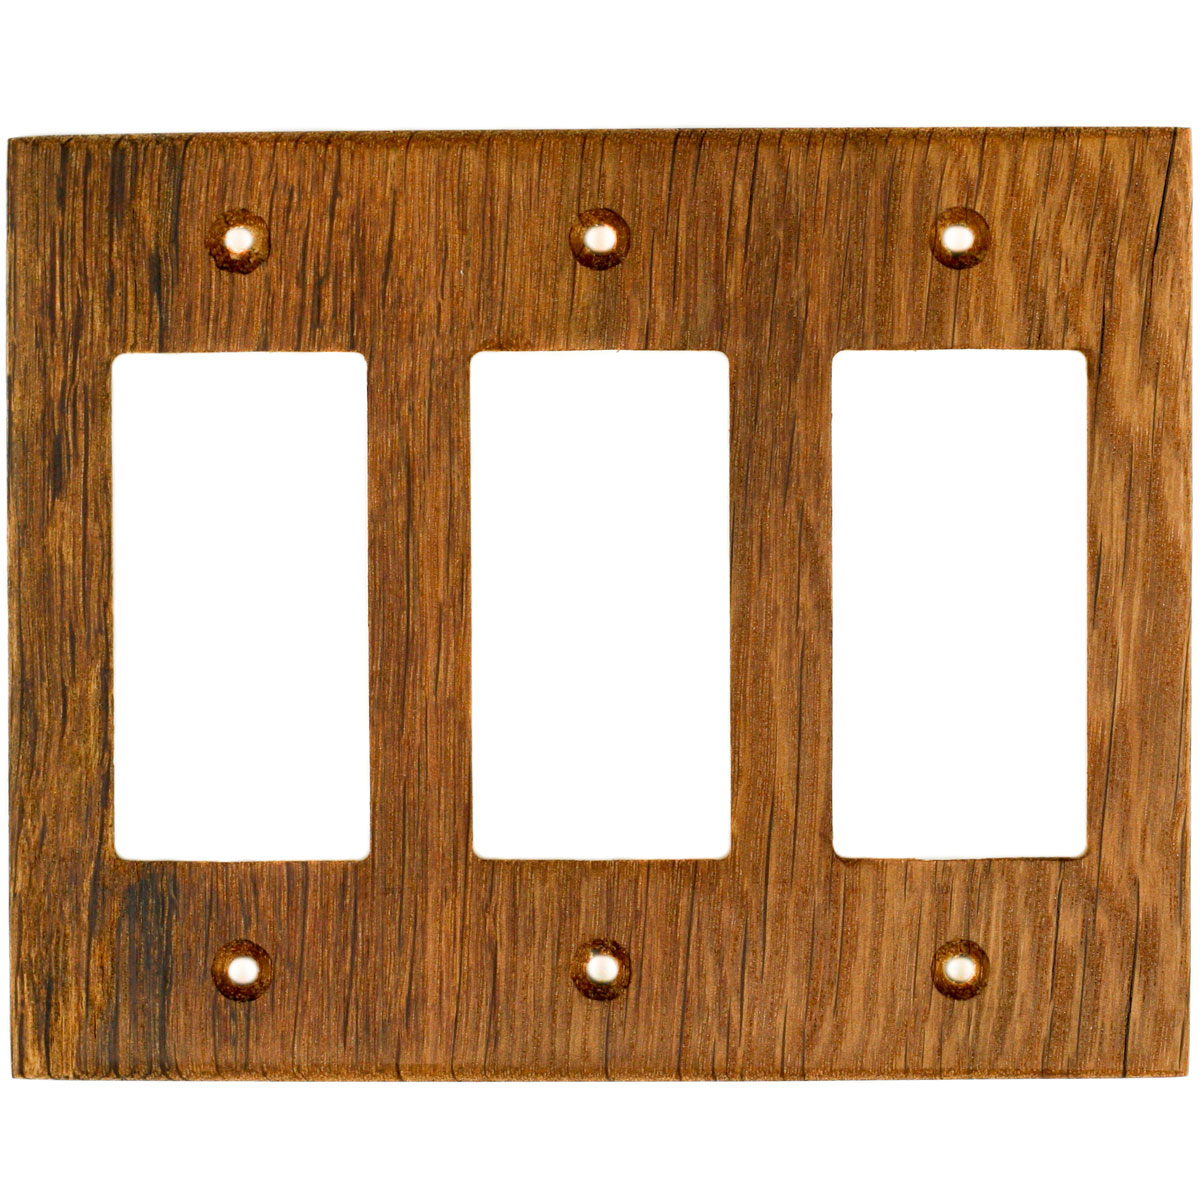 Maple Wood Wall Plate - 1 Gang GFCI Outlet Cover - Virgin Timber Lumber